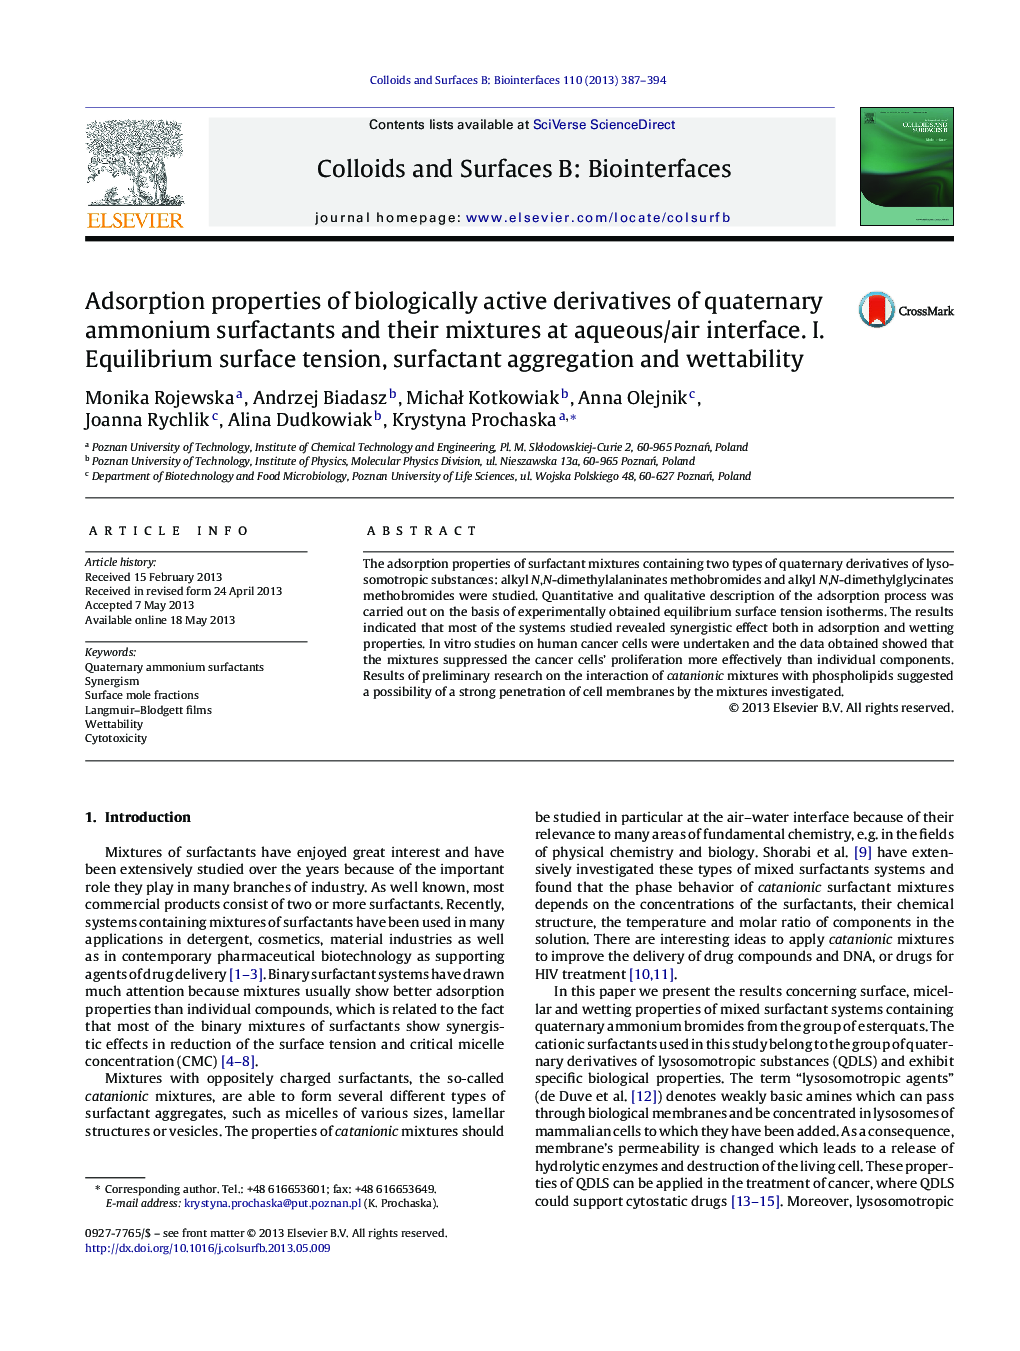 Adsorption properties of biologically active derivatives of quaternary ammonium surfactants and their mixtures at aqueous/air interface. I. Equilibrium surface tension, surfactant aggregation and wettability